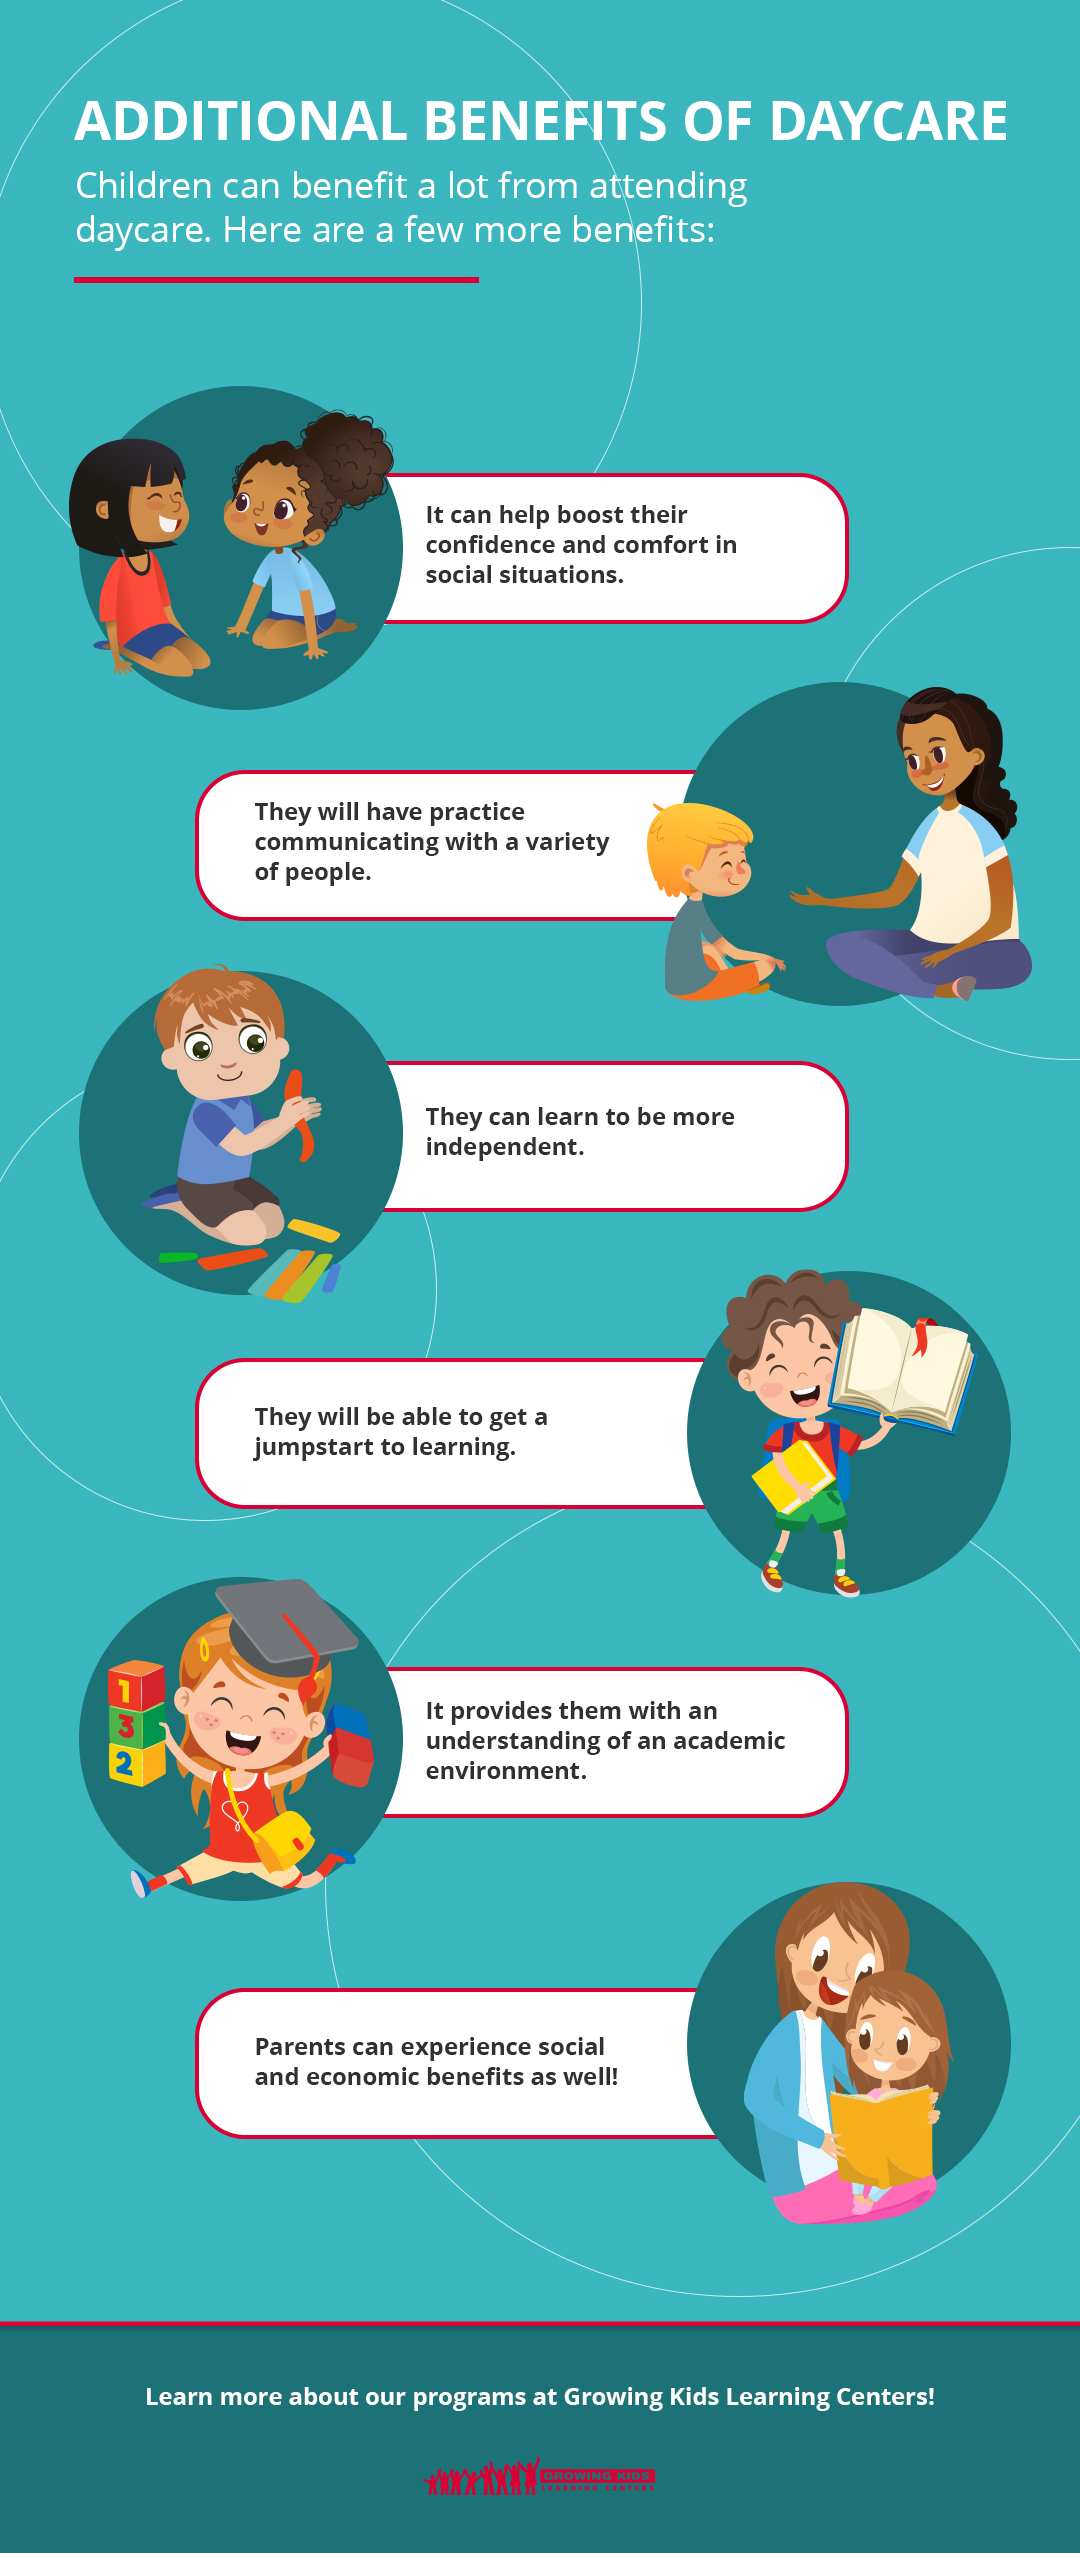 5 Benefits of Daycare For Your Child